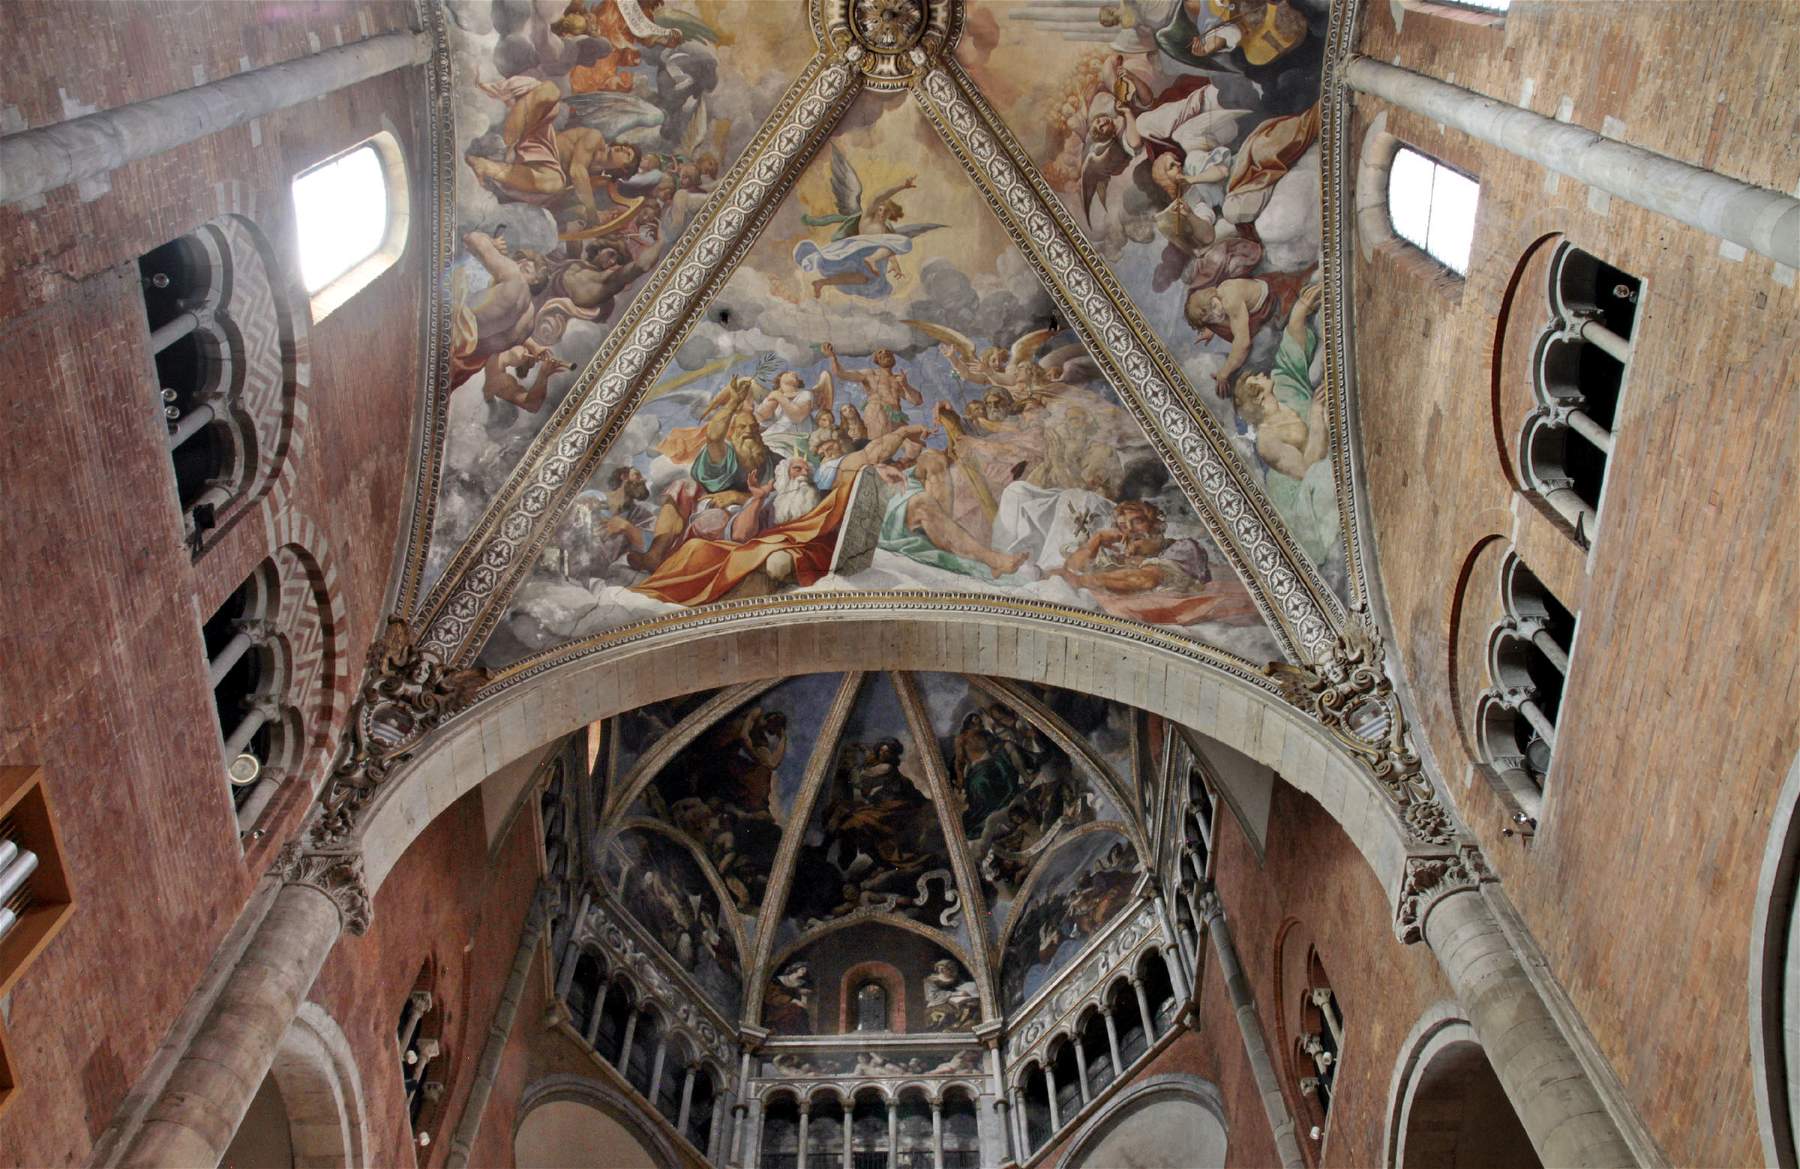 In Piacenza for three months you can climb the dome of the cathedral to see Ludovico Carracci's frescoes